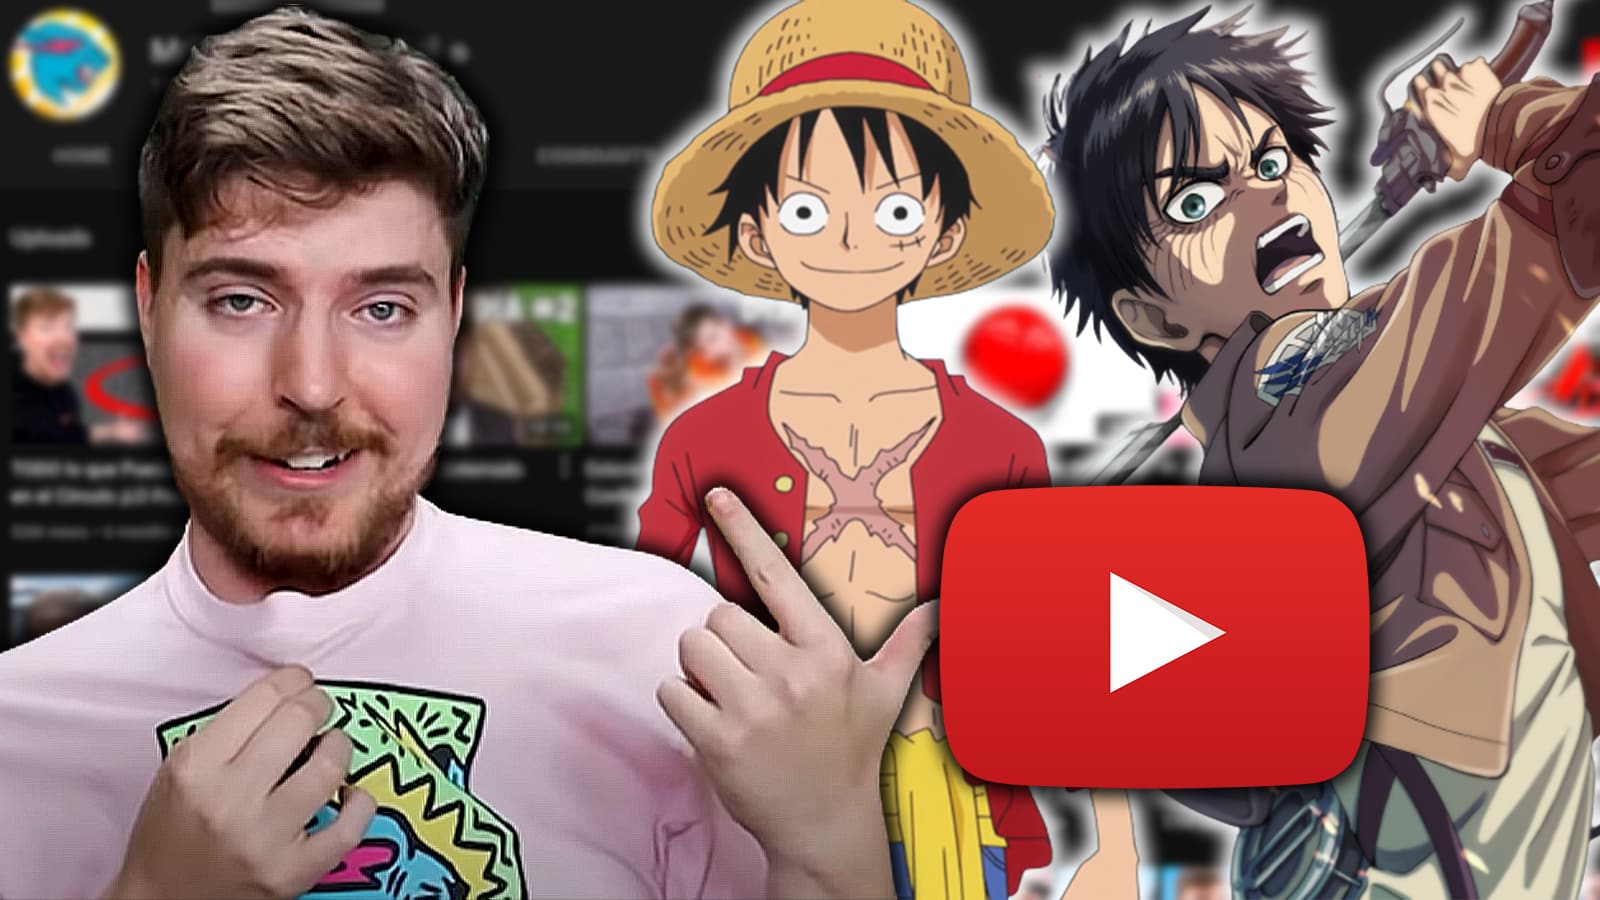 MrBeast teases “giant” anime voice actor for upcoming Japanese language  YouTube dub channel - Dexerto